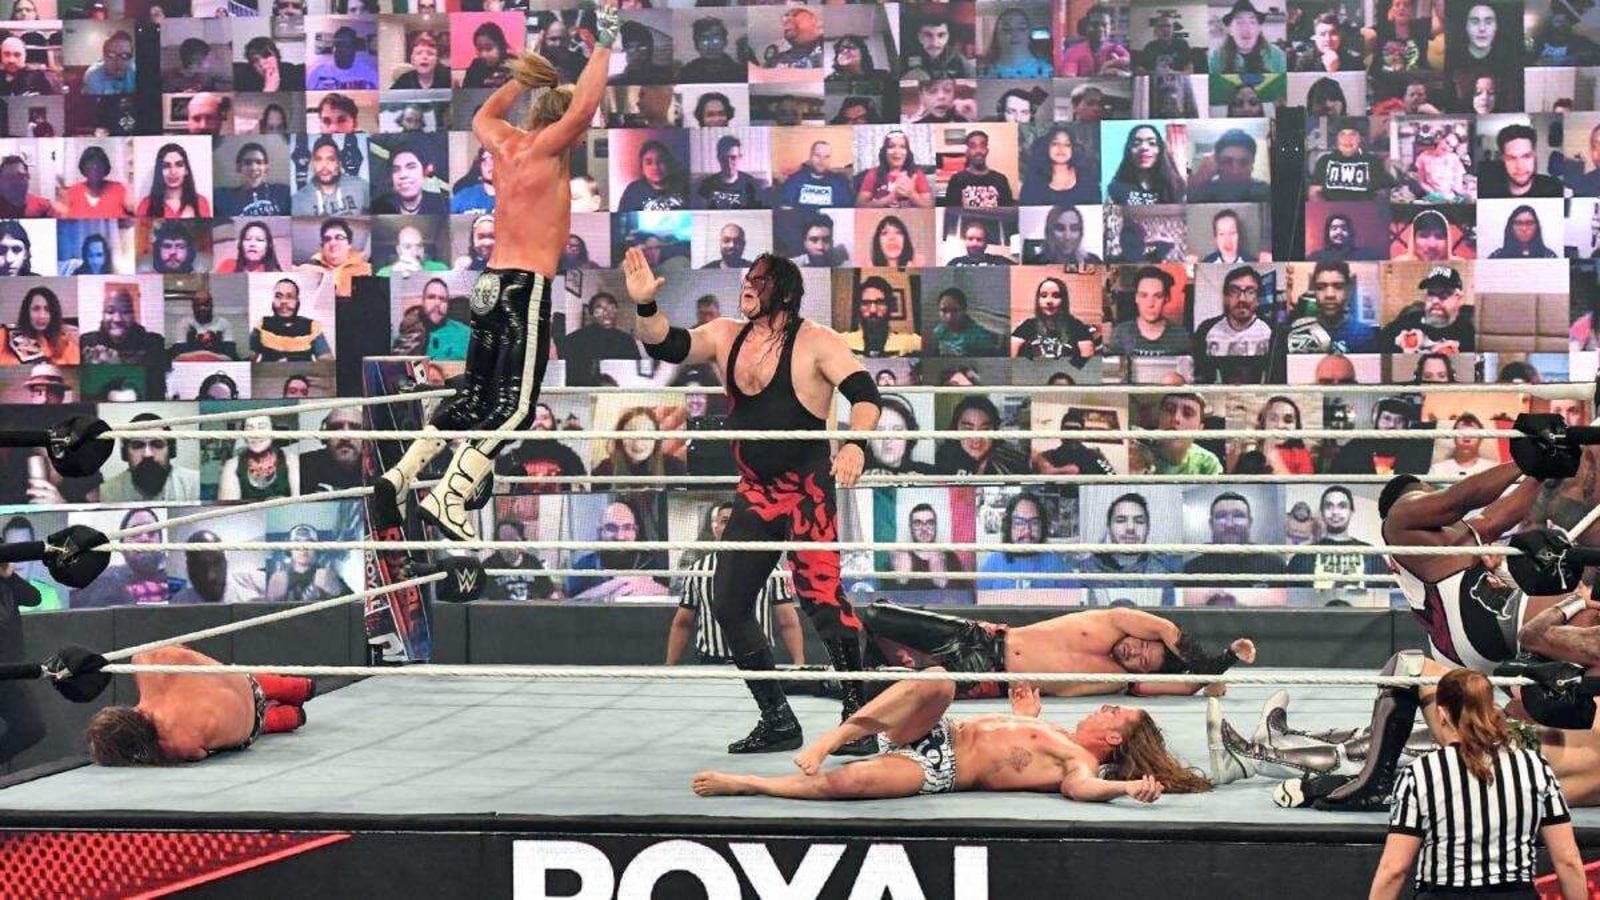 wwe 2k11 royal rumble not get eliminated